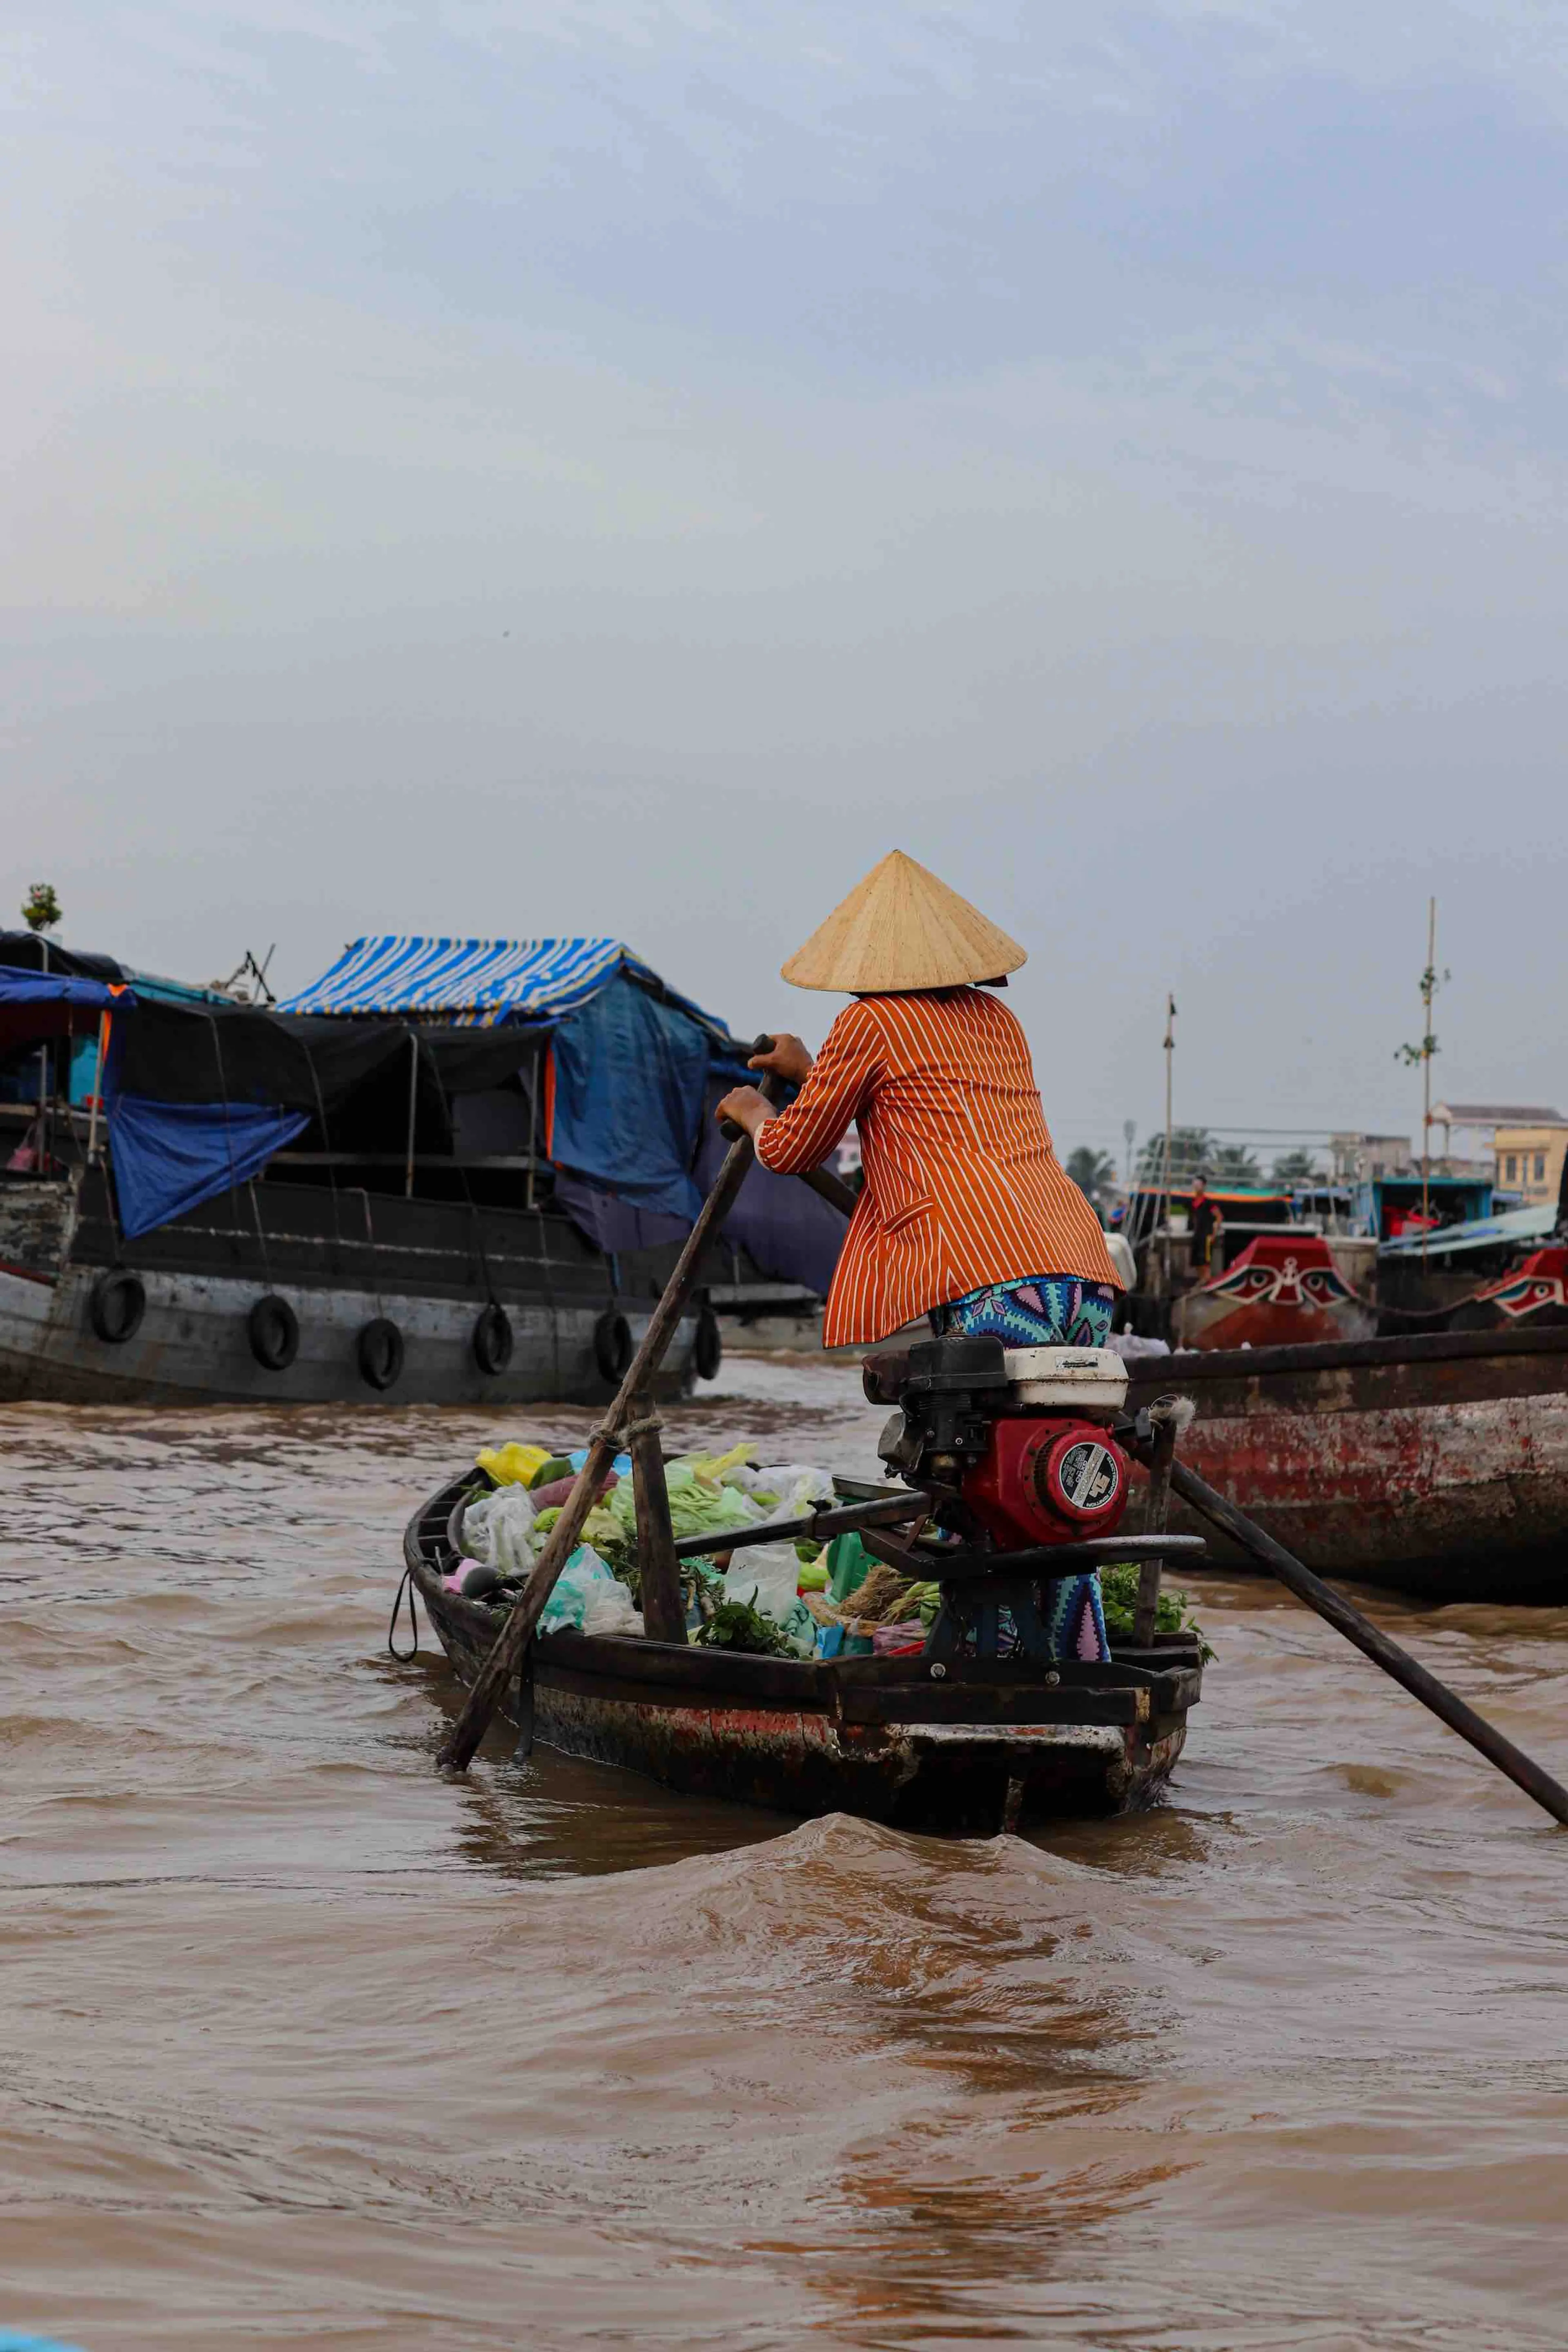 The Floating Market Is One Of Mekong Delta "Specialty"